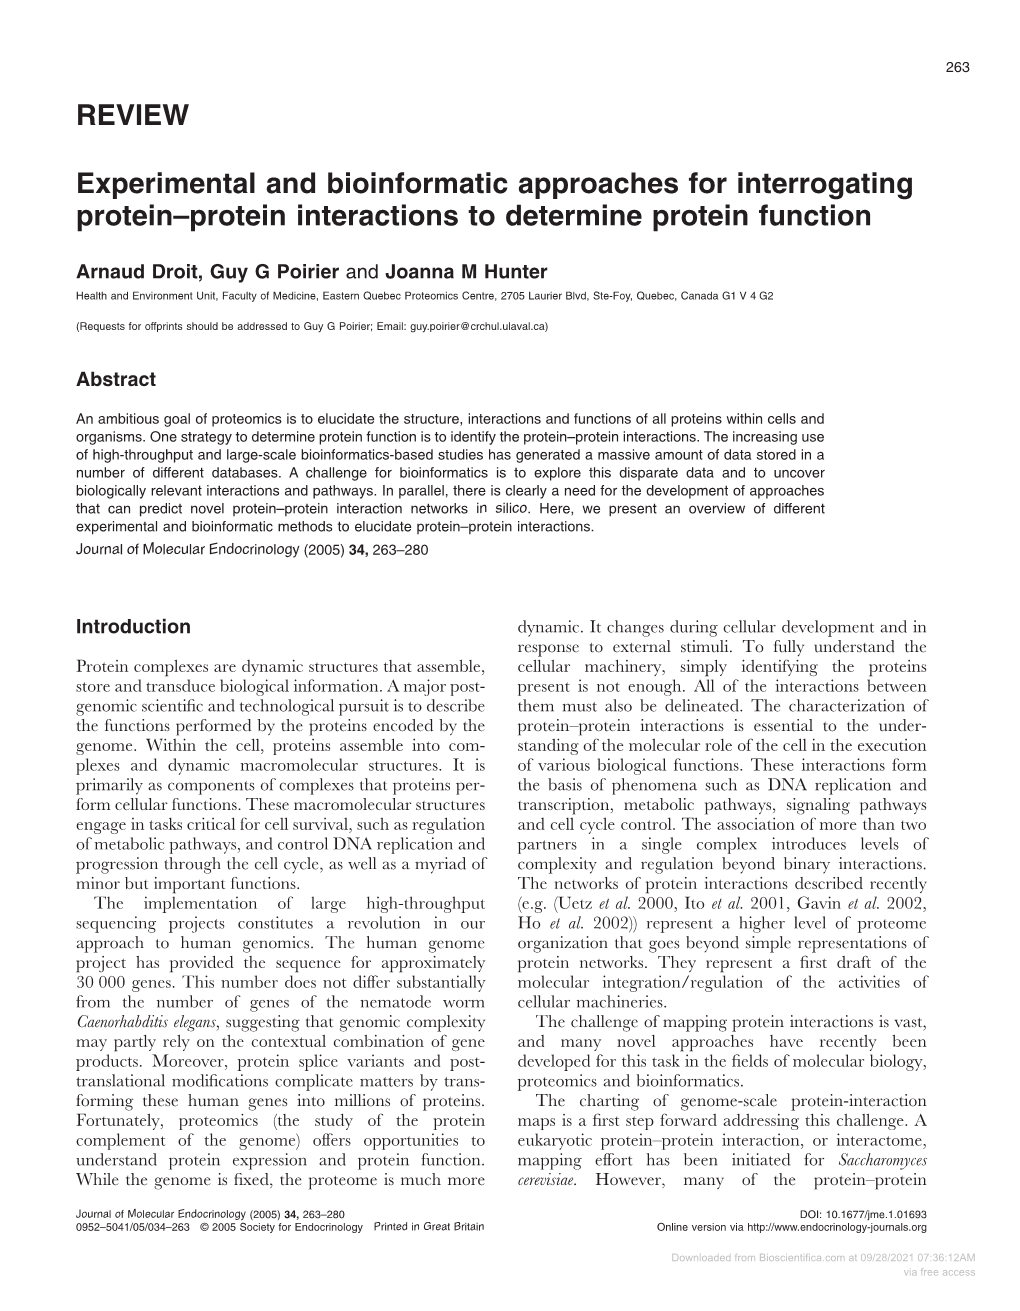 REVIEW Experimental and Bioinformatic Approaches for Interrogating Protein–Protein Interactions to Determine Protein Function